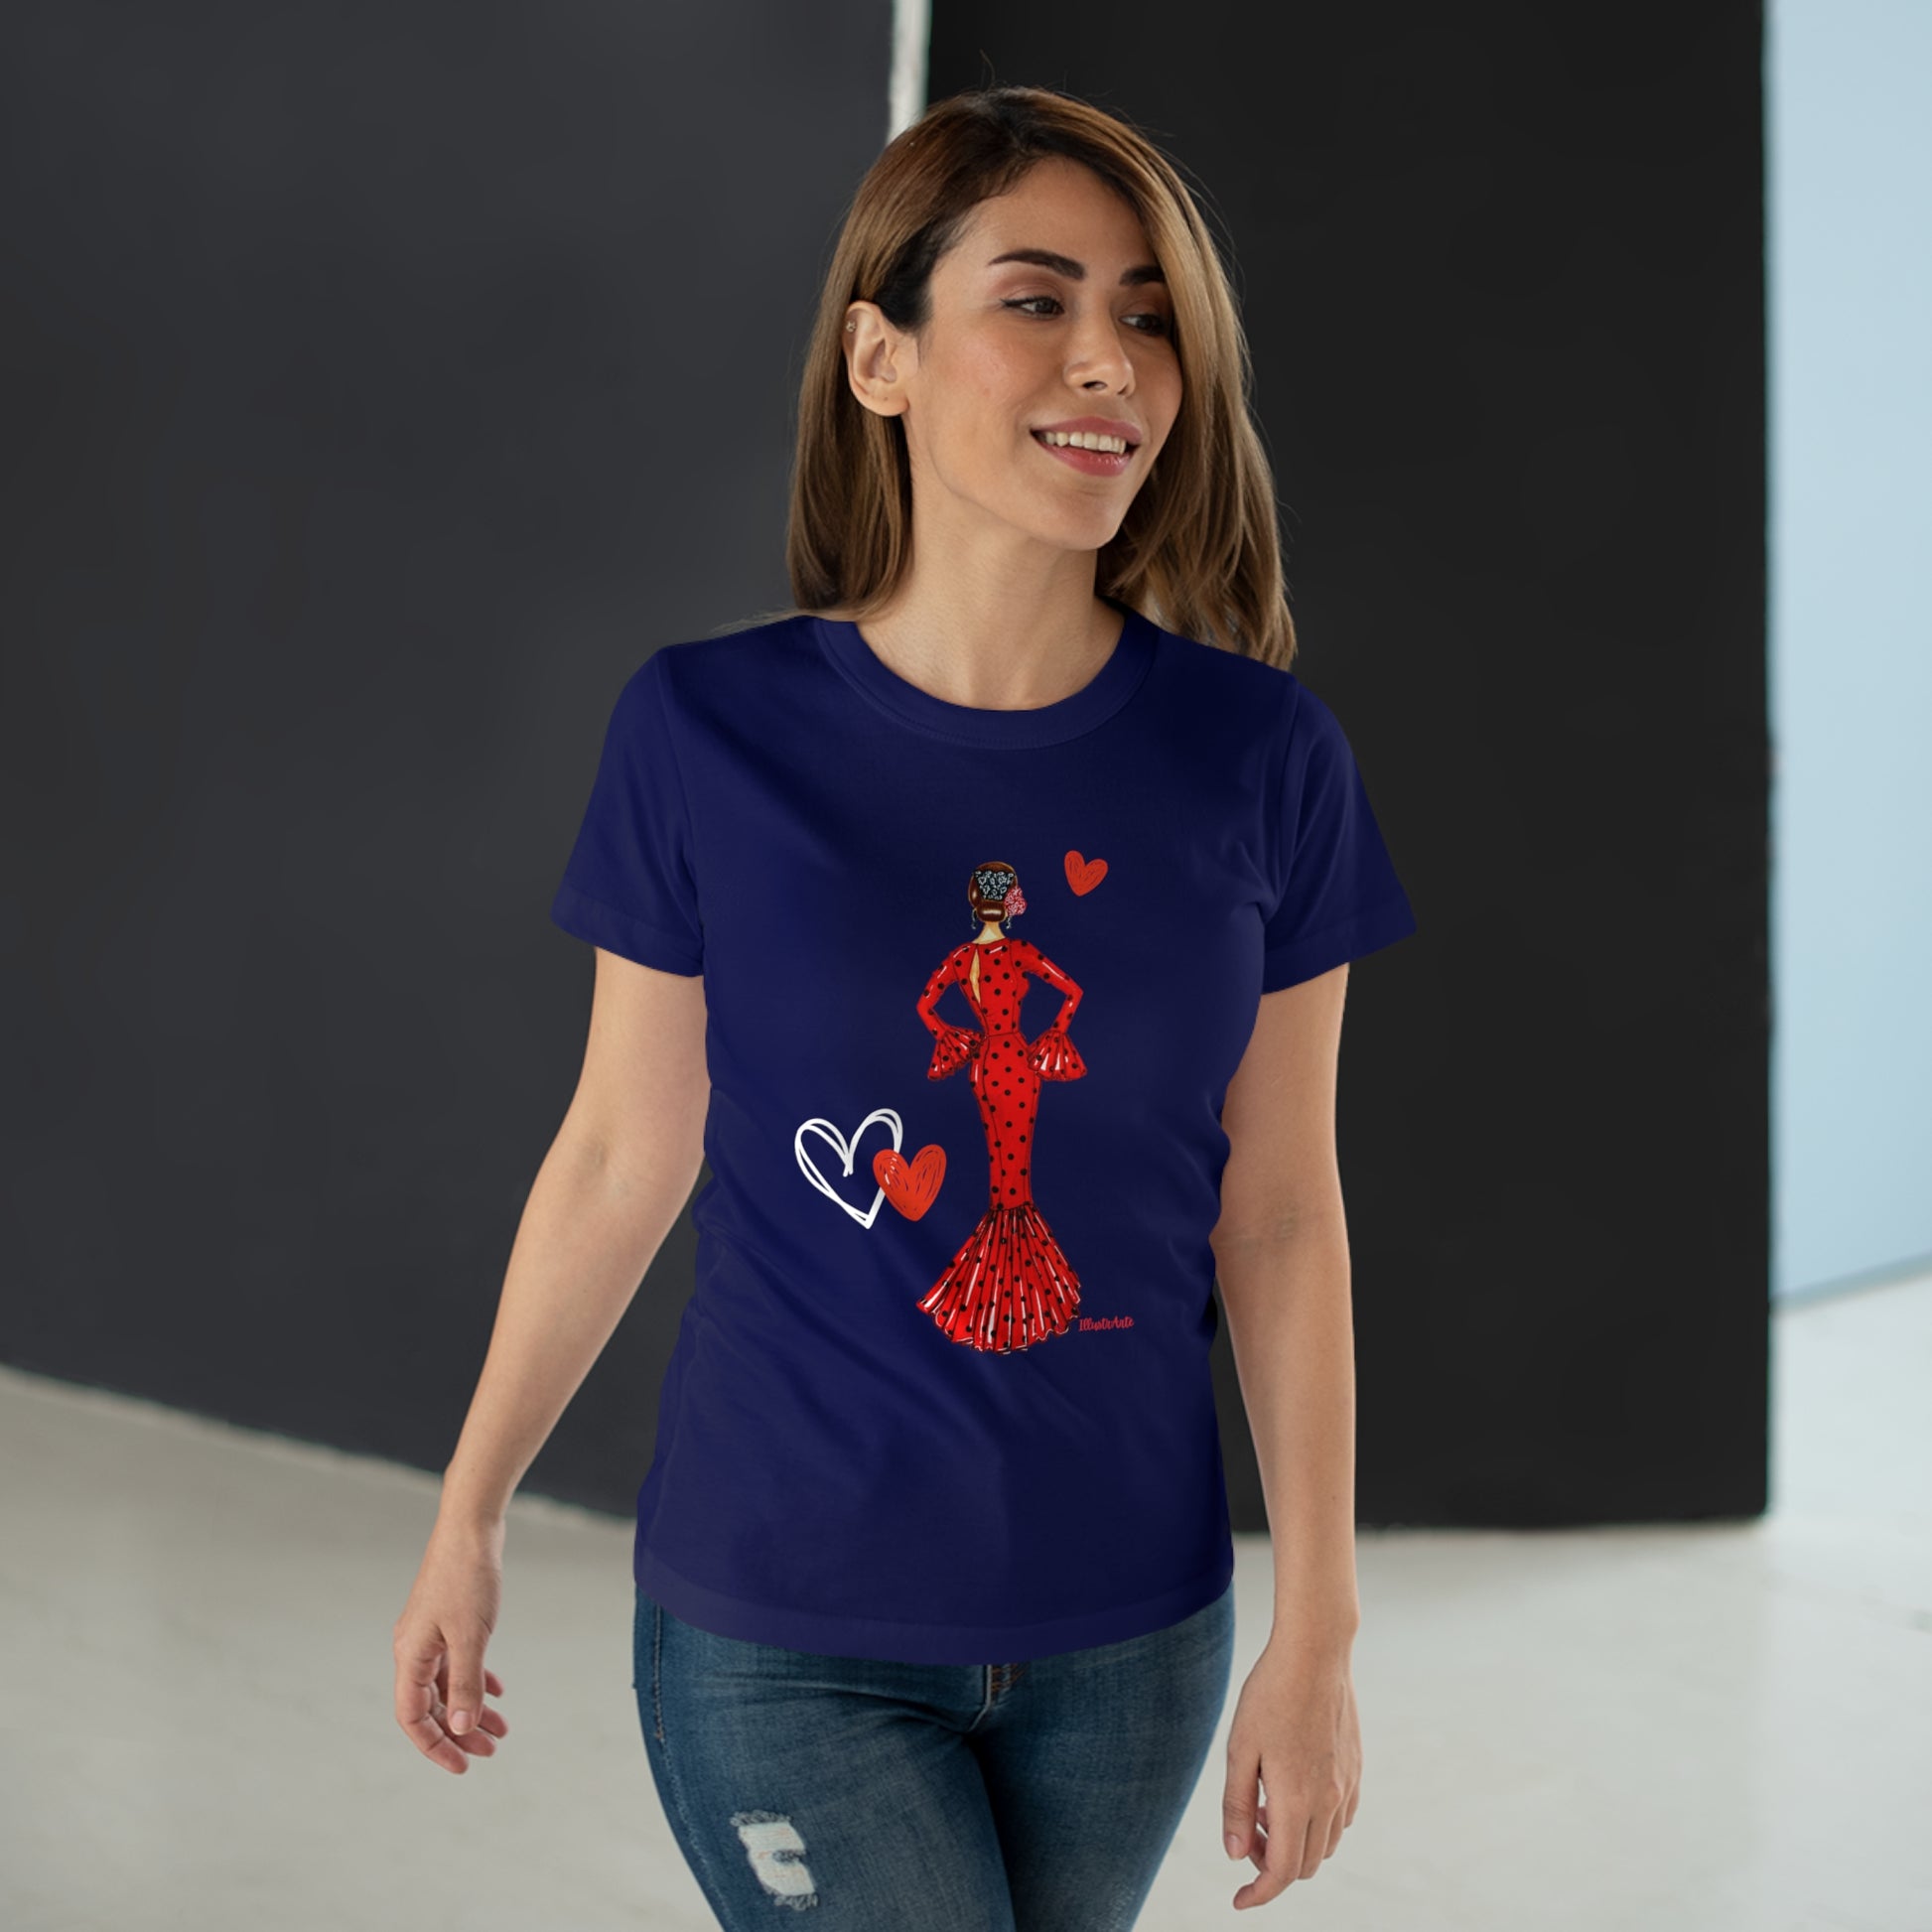 a woman wearing a blue t - shirt with a red dress and hearts on it